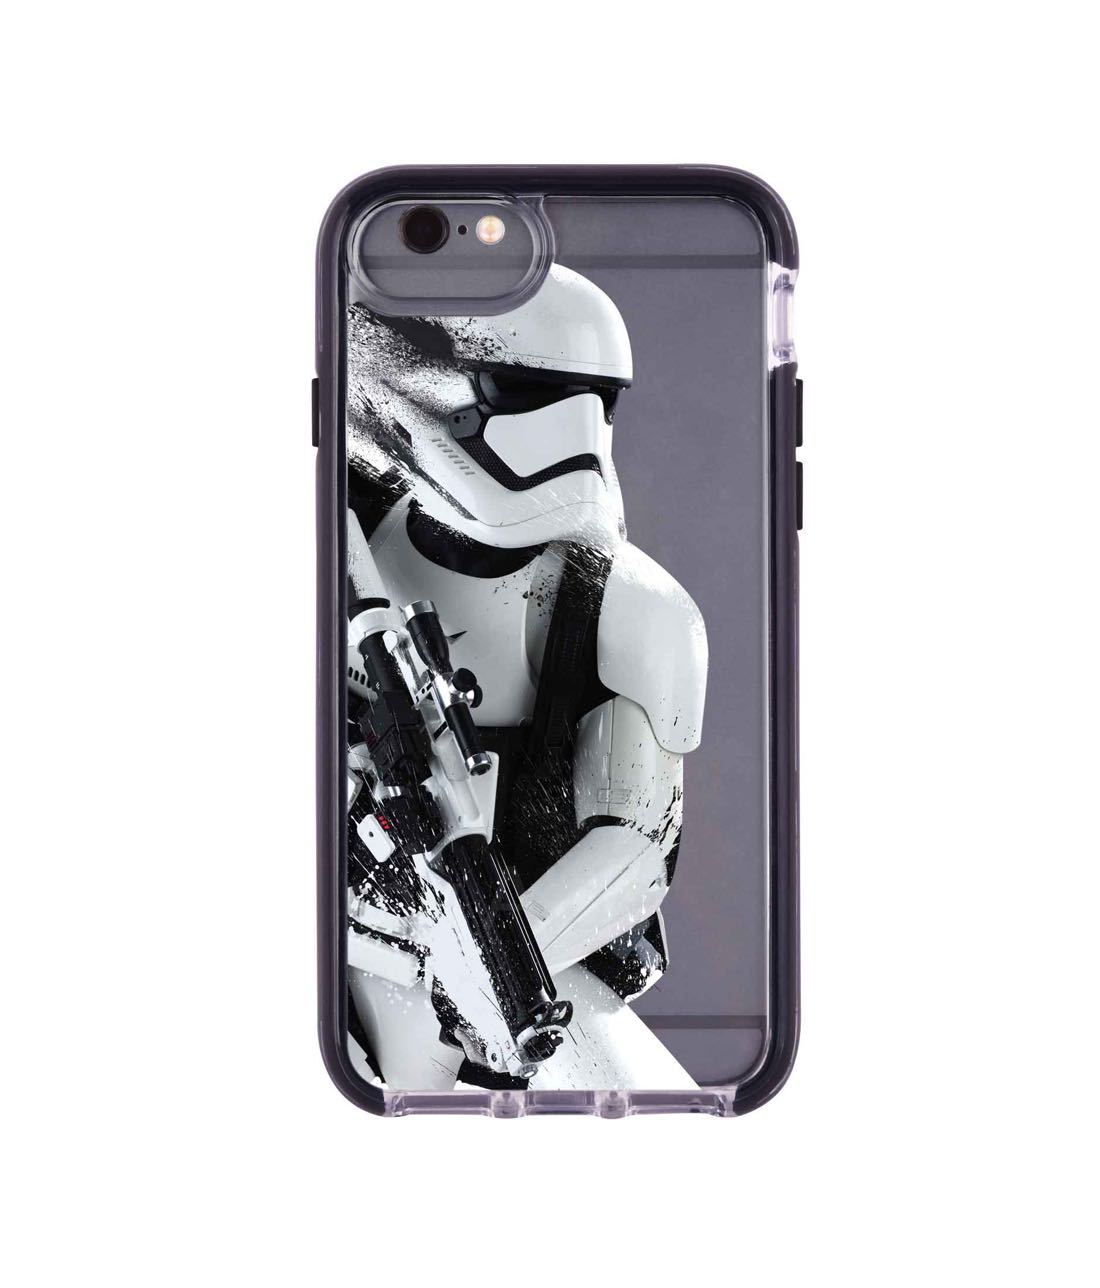 Trooper Storm - Extreme Phone Case for iPhone 6S